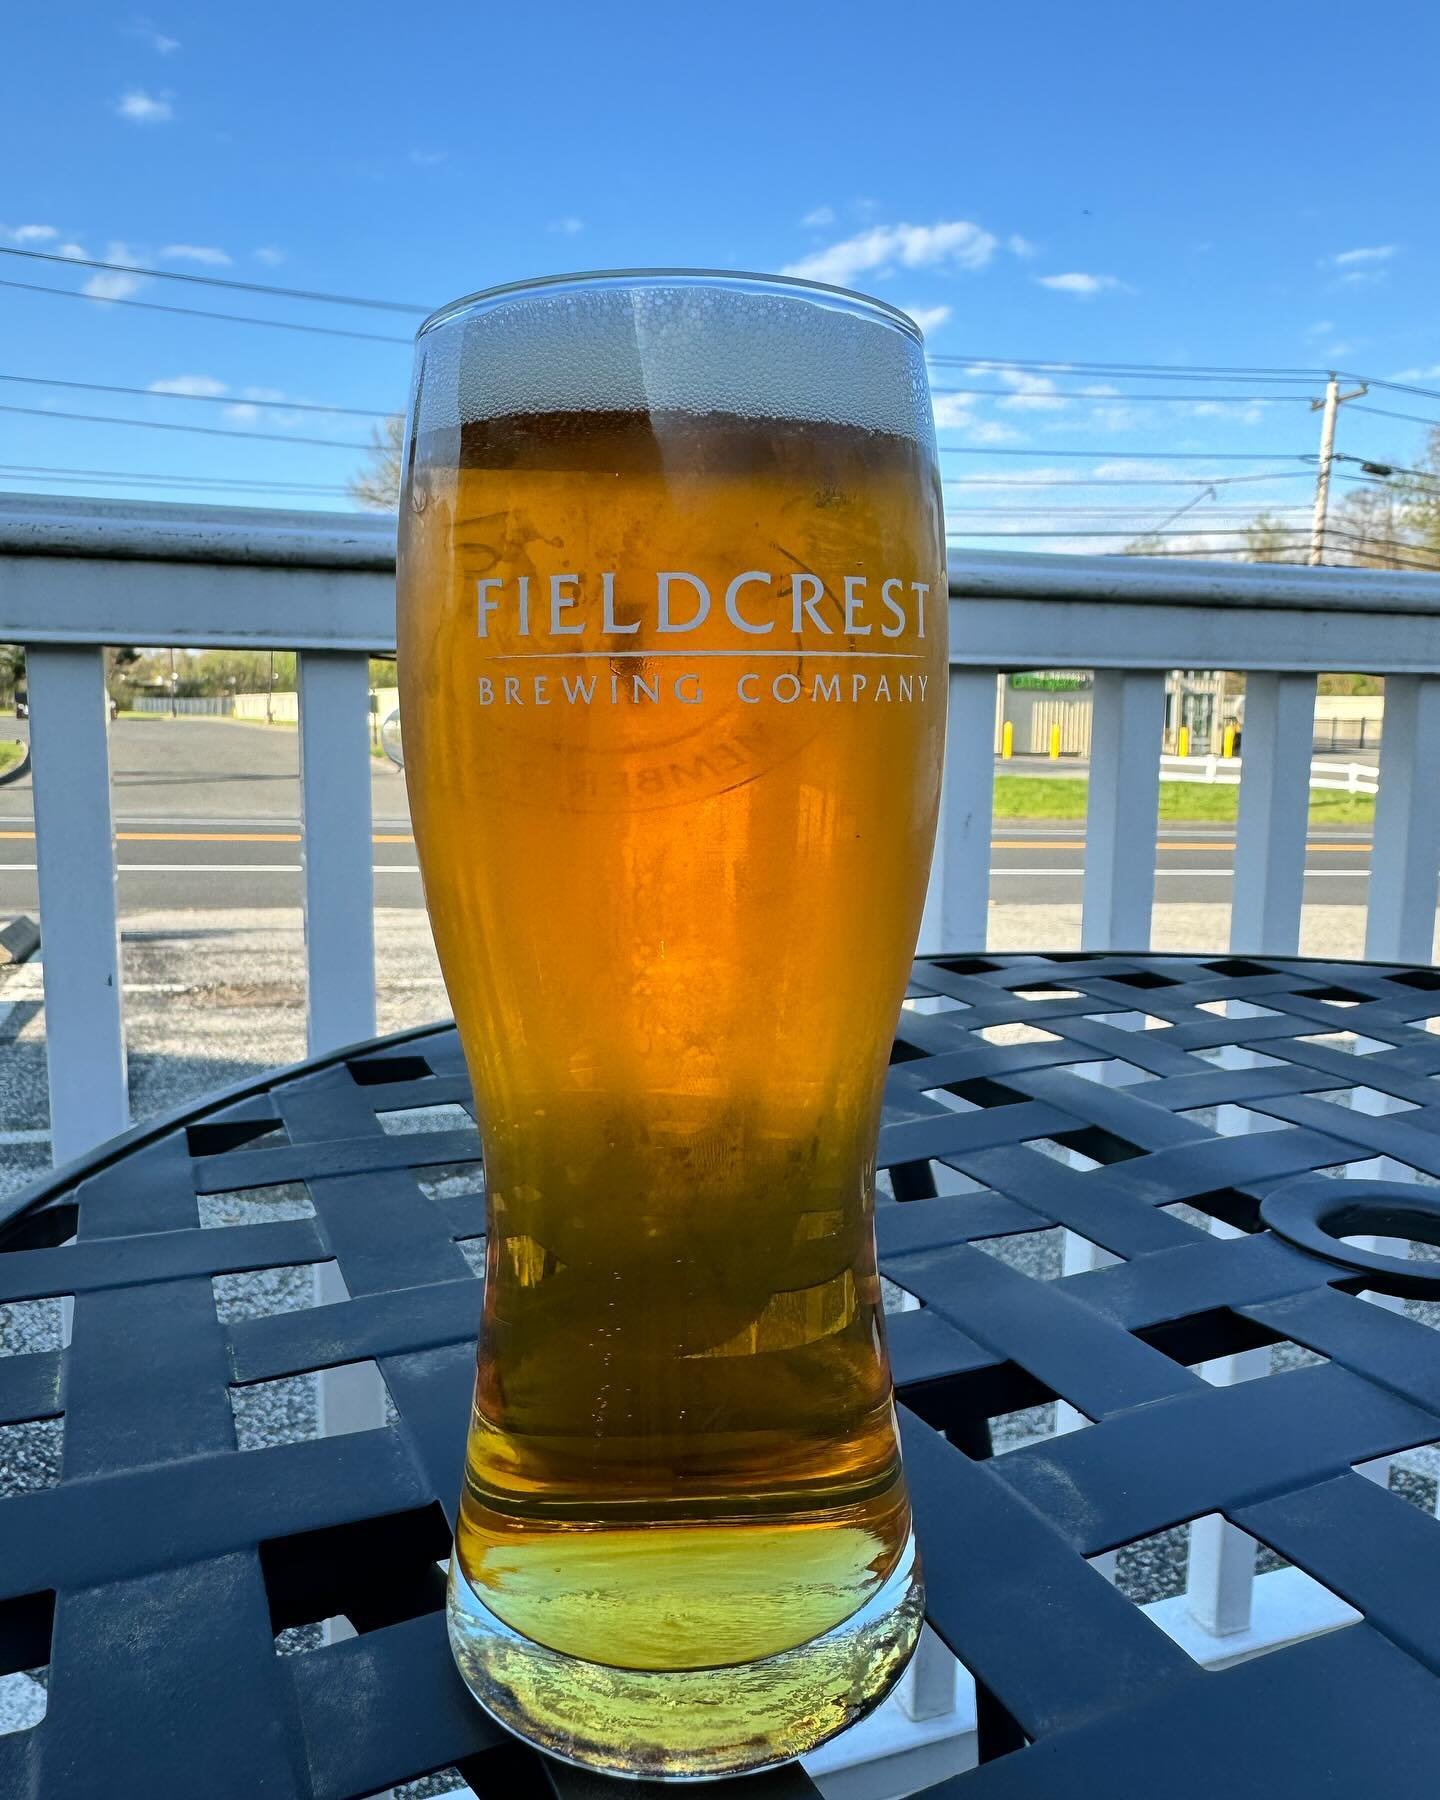 What a pretty beer! SoCal - West Coast Pale Ale on tap now! Deck weather is here&hellip;today 😂. #fieldcrestbrewing #socal